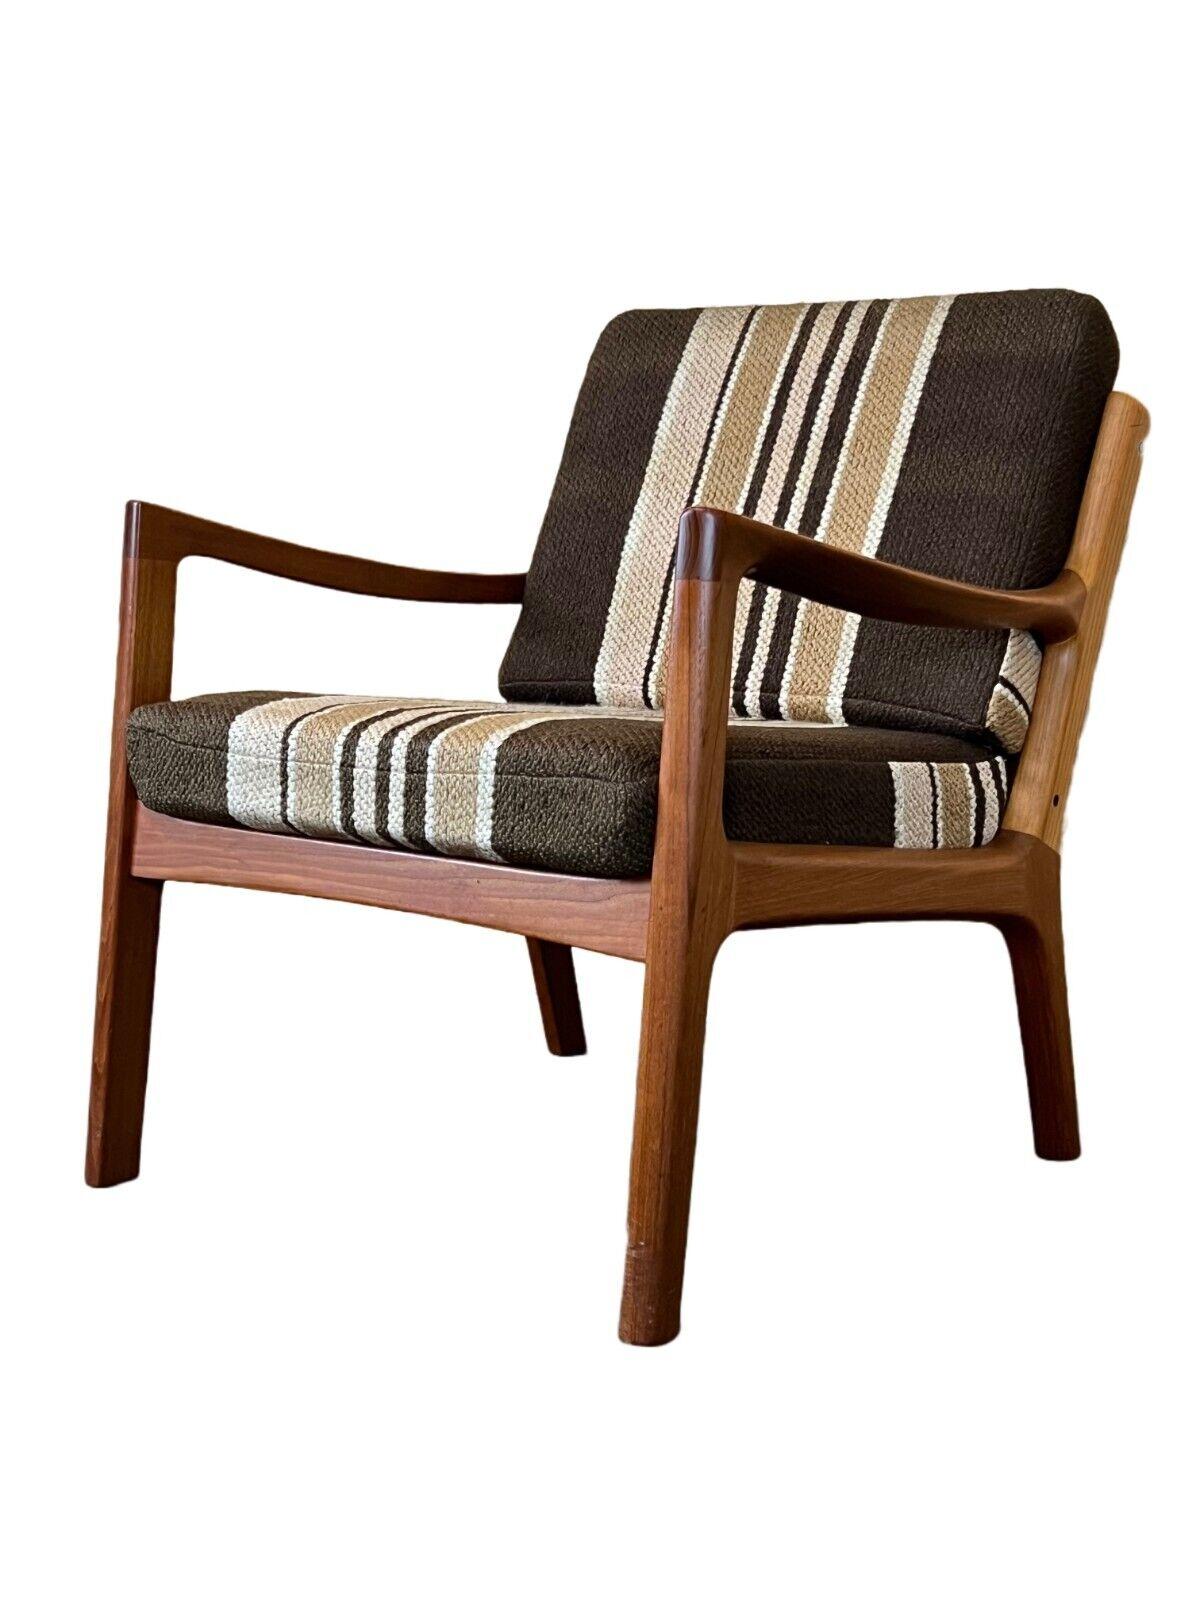 1960s-1970s Teak easy chair Ole Wanscher Cado France & Son Denmark

Object: easy chair

Manufacturer: Cado / France & Son

Condition: good - vintage

Age: around 1960-1970

Dimensions:

Width = 68.5cm
Depth = 75cm
Height = 80cm
Seat